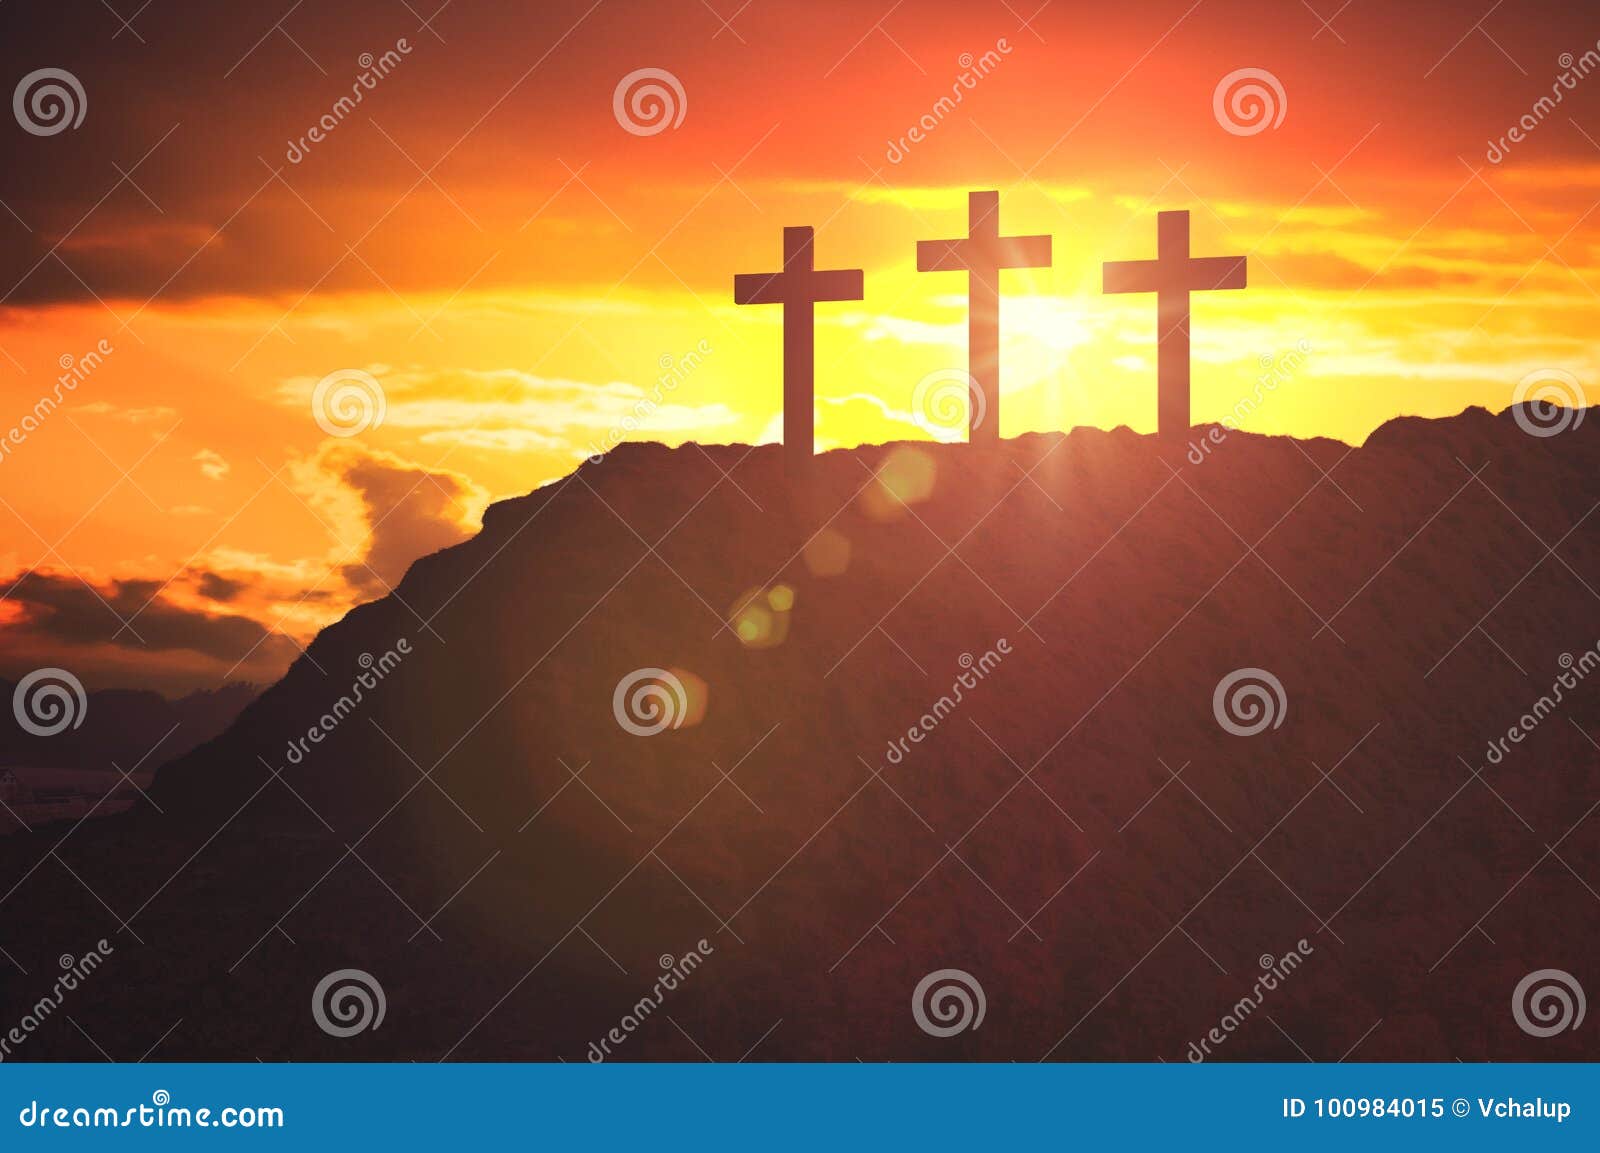 silhouettes of three crosses at sunset on hill. religion and christianity concept